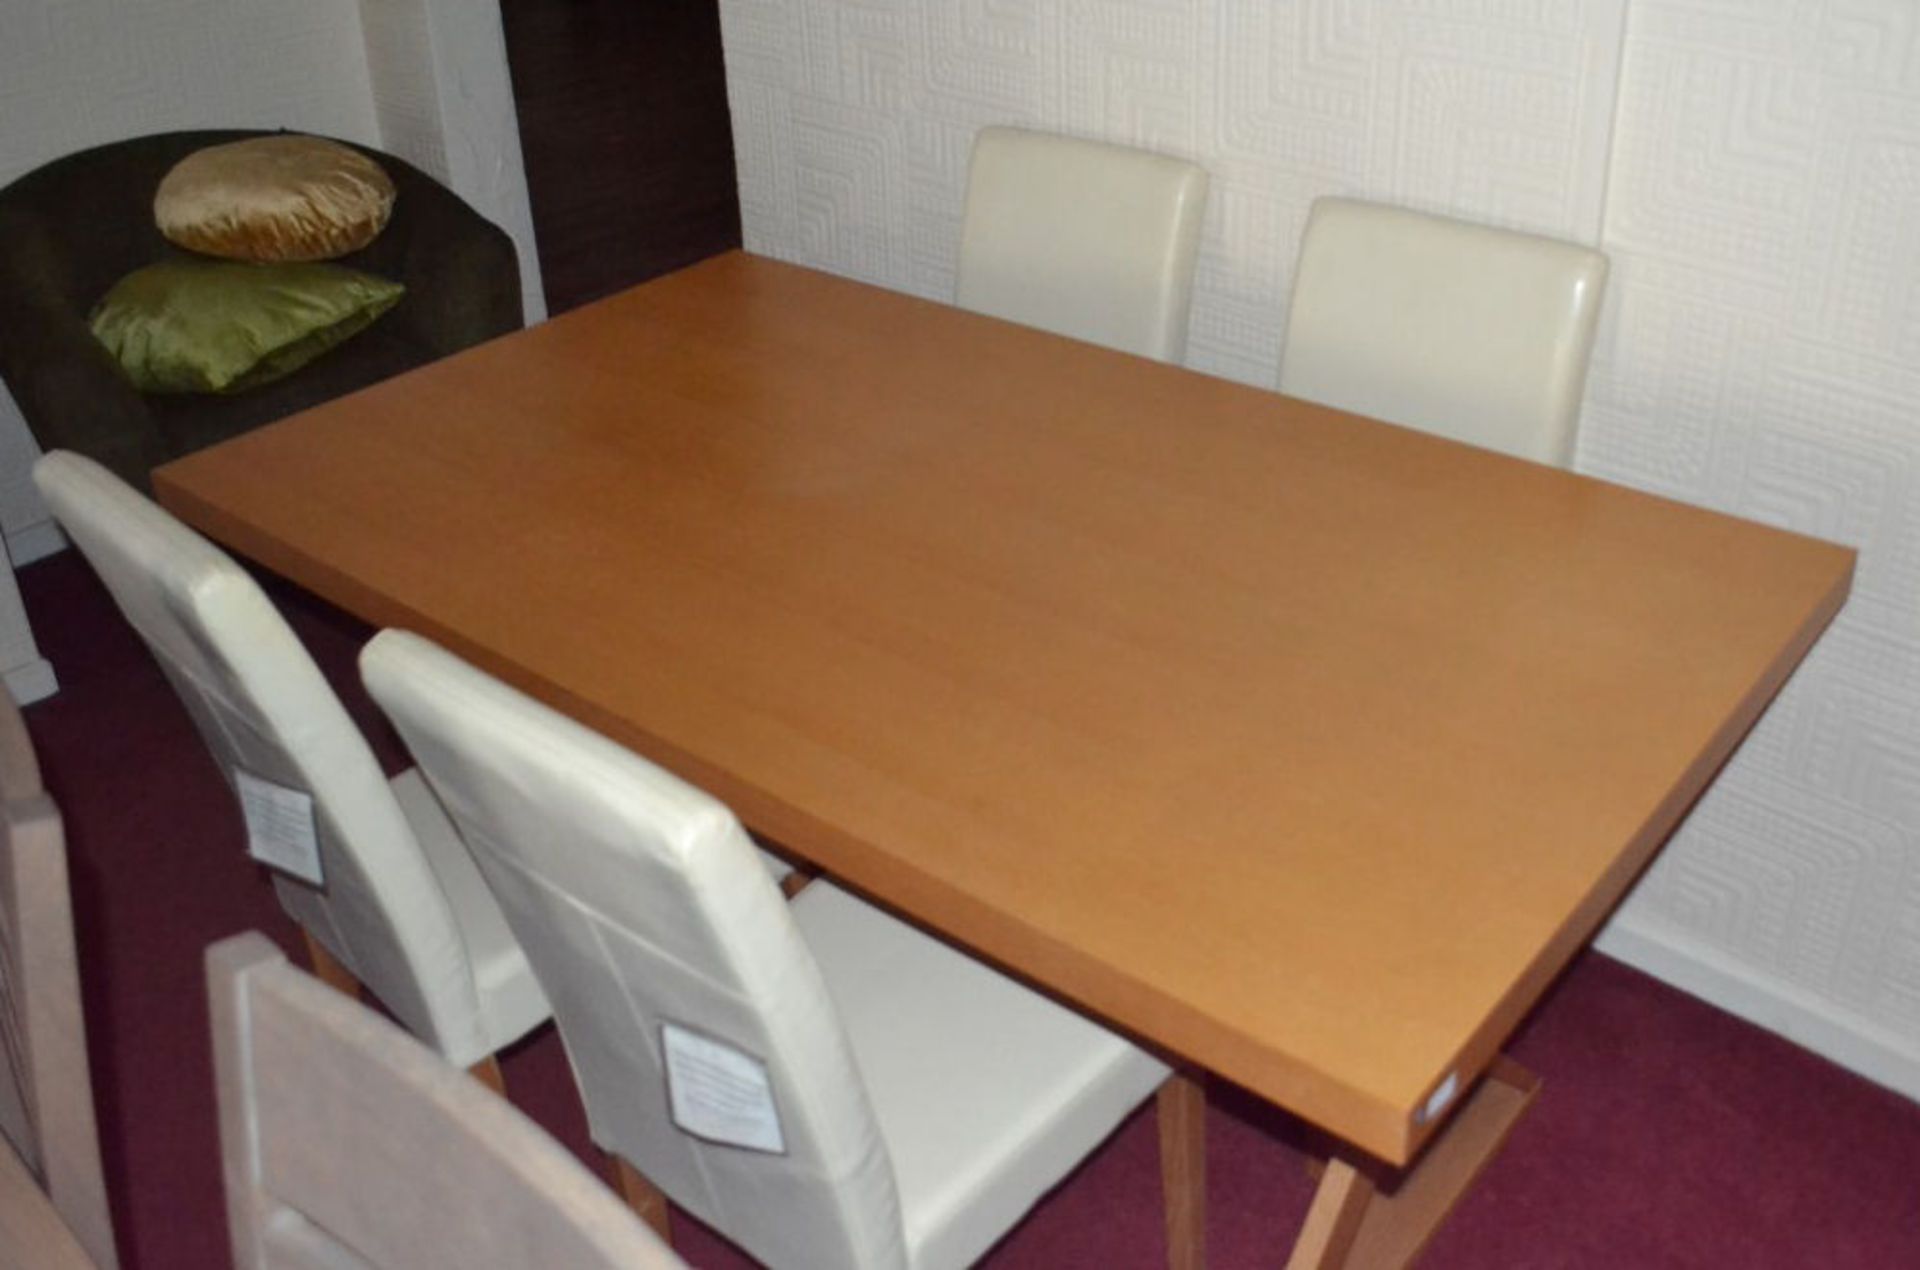 1 x Dining Table With 4 Cream Chairs. Length 160cm, Width 90cm, Height 77cm. - Image 2 of 5